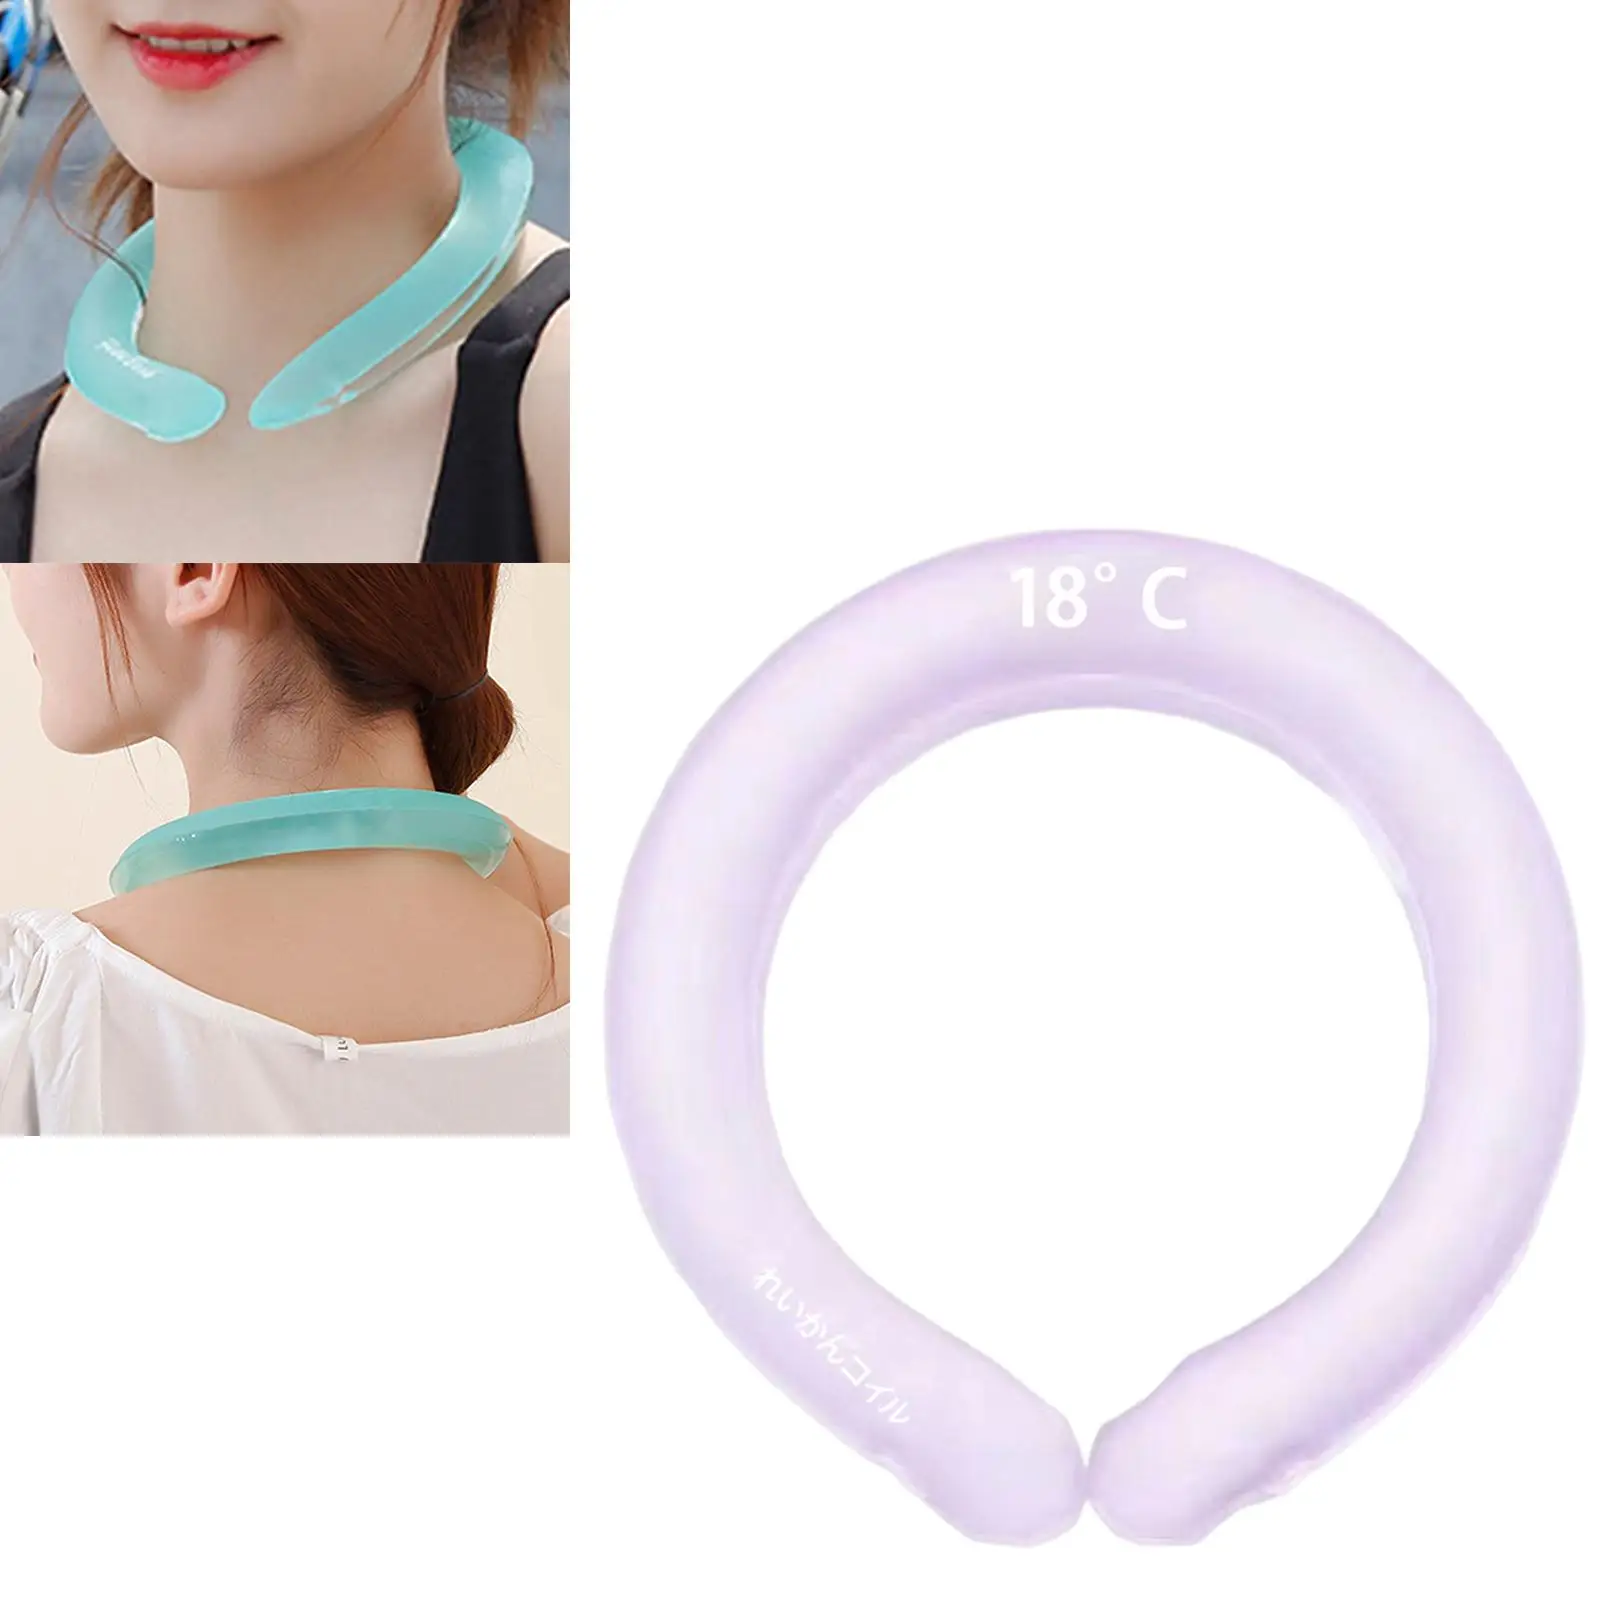 Wearable Neck Cooling Tube Cold Neck Collar Hands Free for Running Hiking